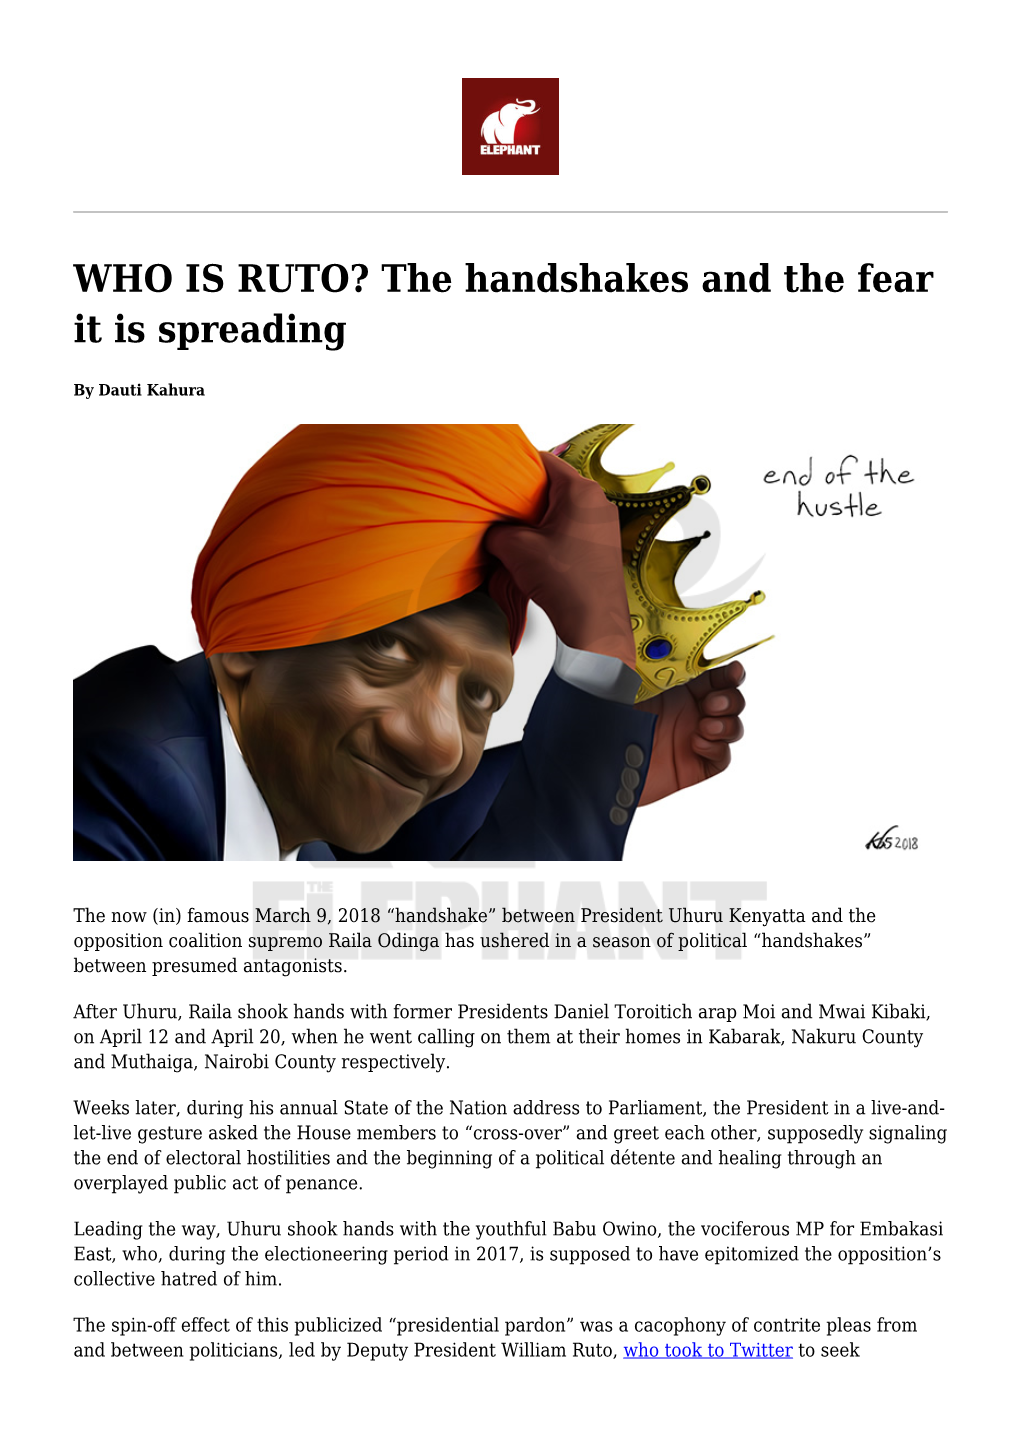 WHO IS RUTO? the Handshakes and the Fear It Is Spreading